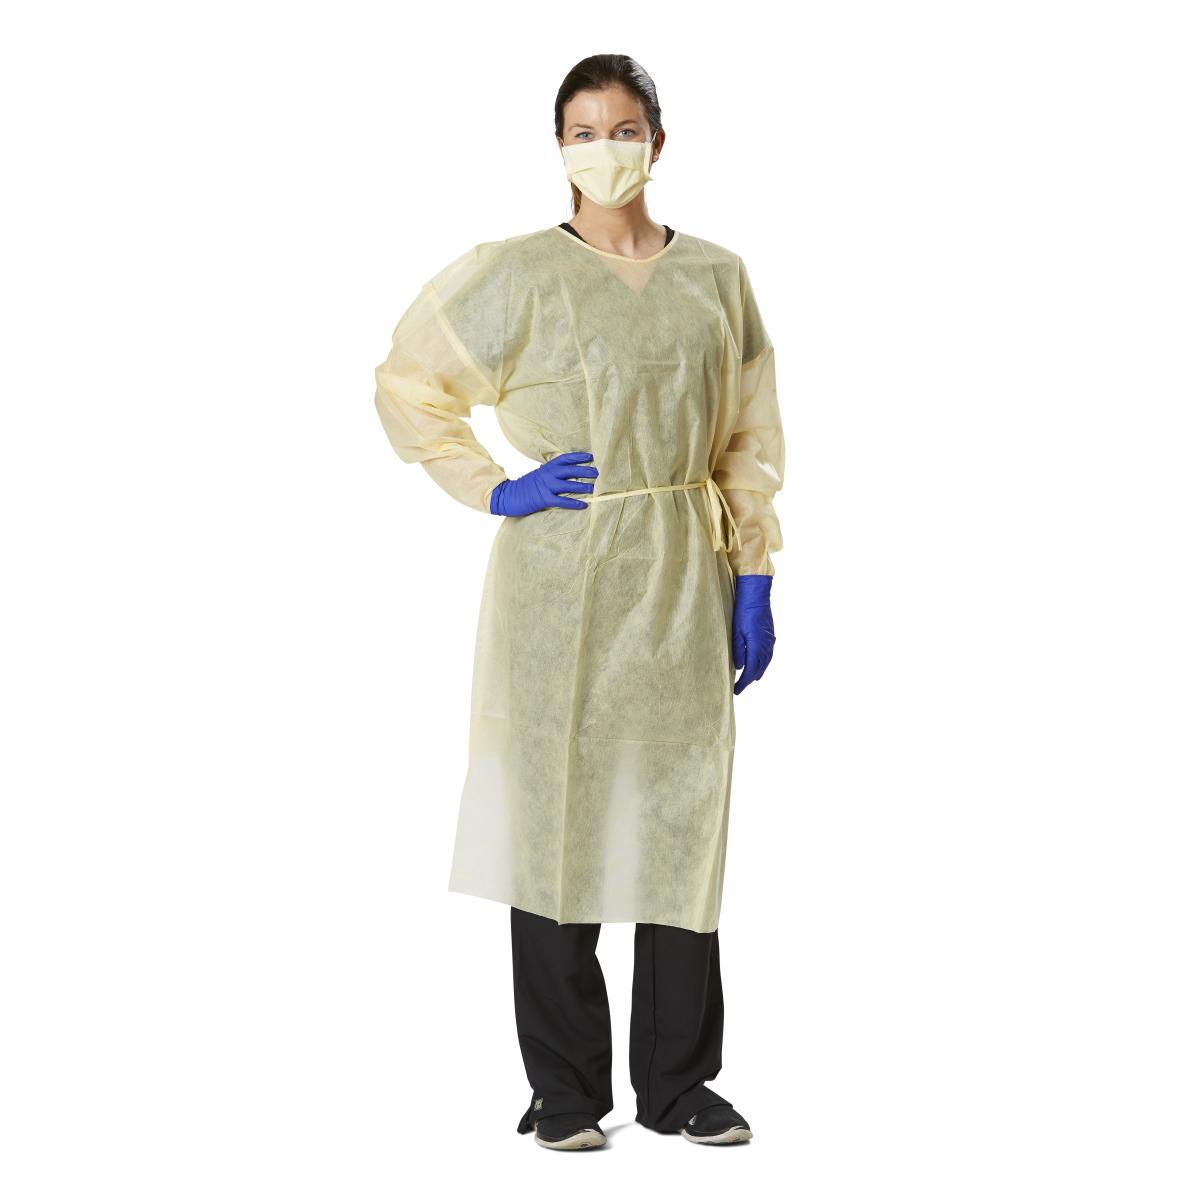 AAMI Level 1 Isolation Gown, Thumb Loop, XL